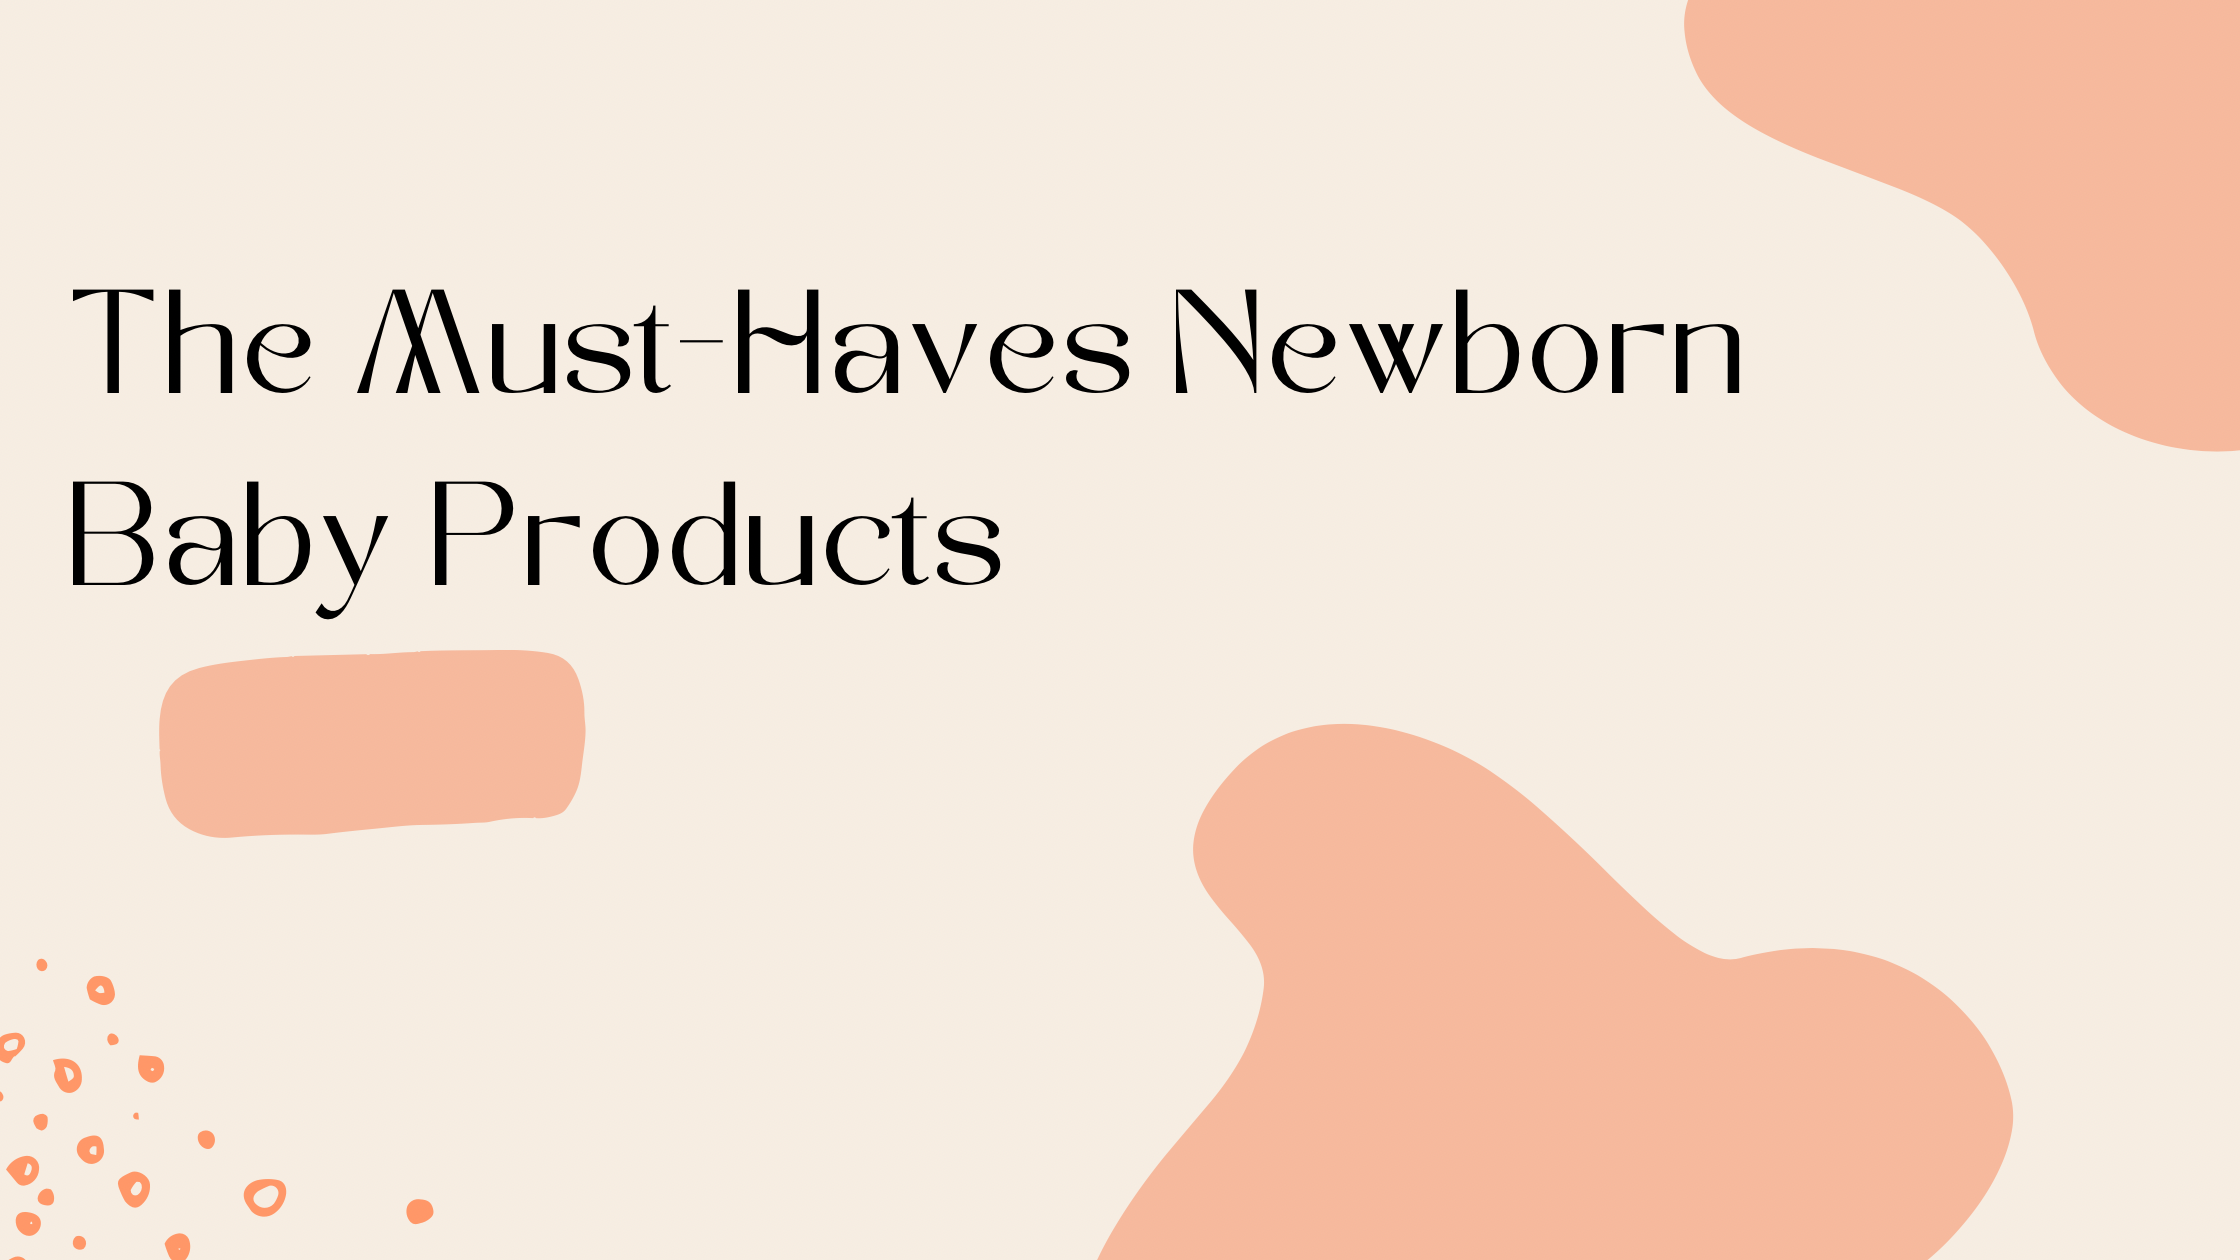 The Must-Haves Newborn Baby Products